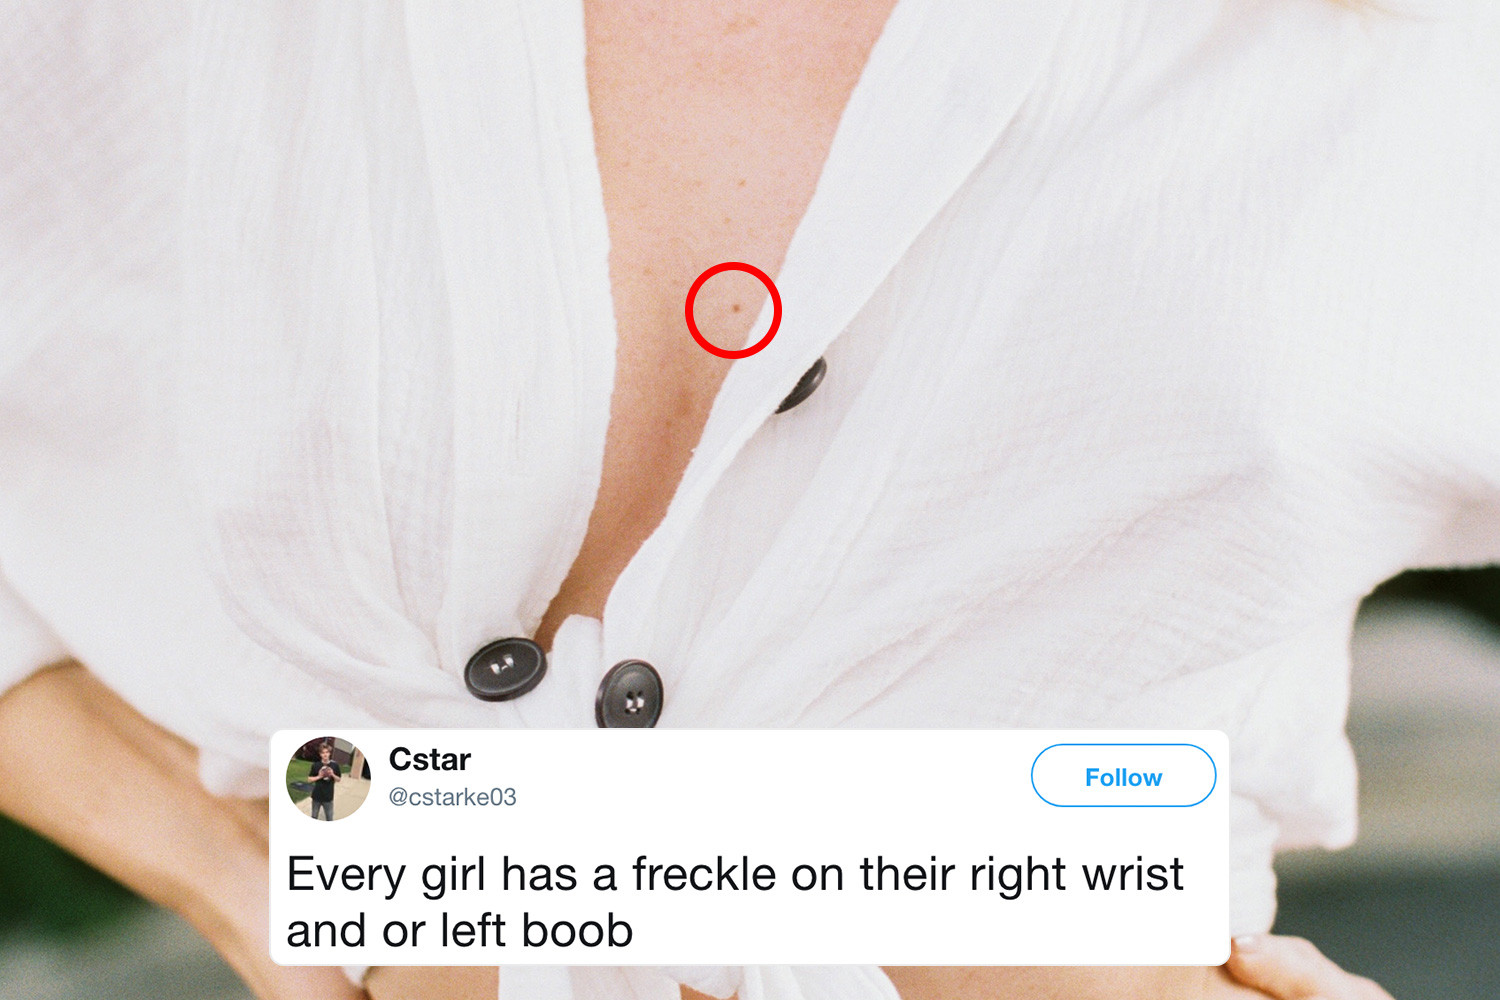 ayesha avila recommends freckles on boobs pic